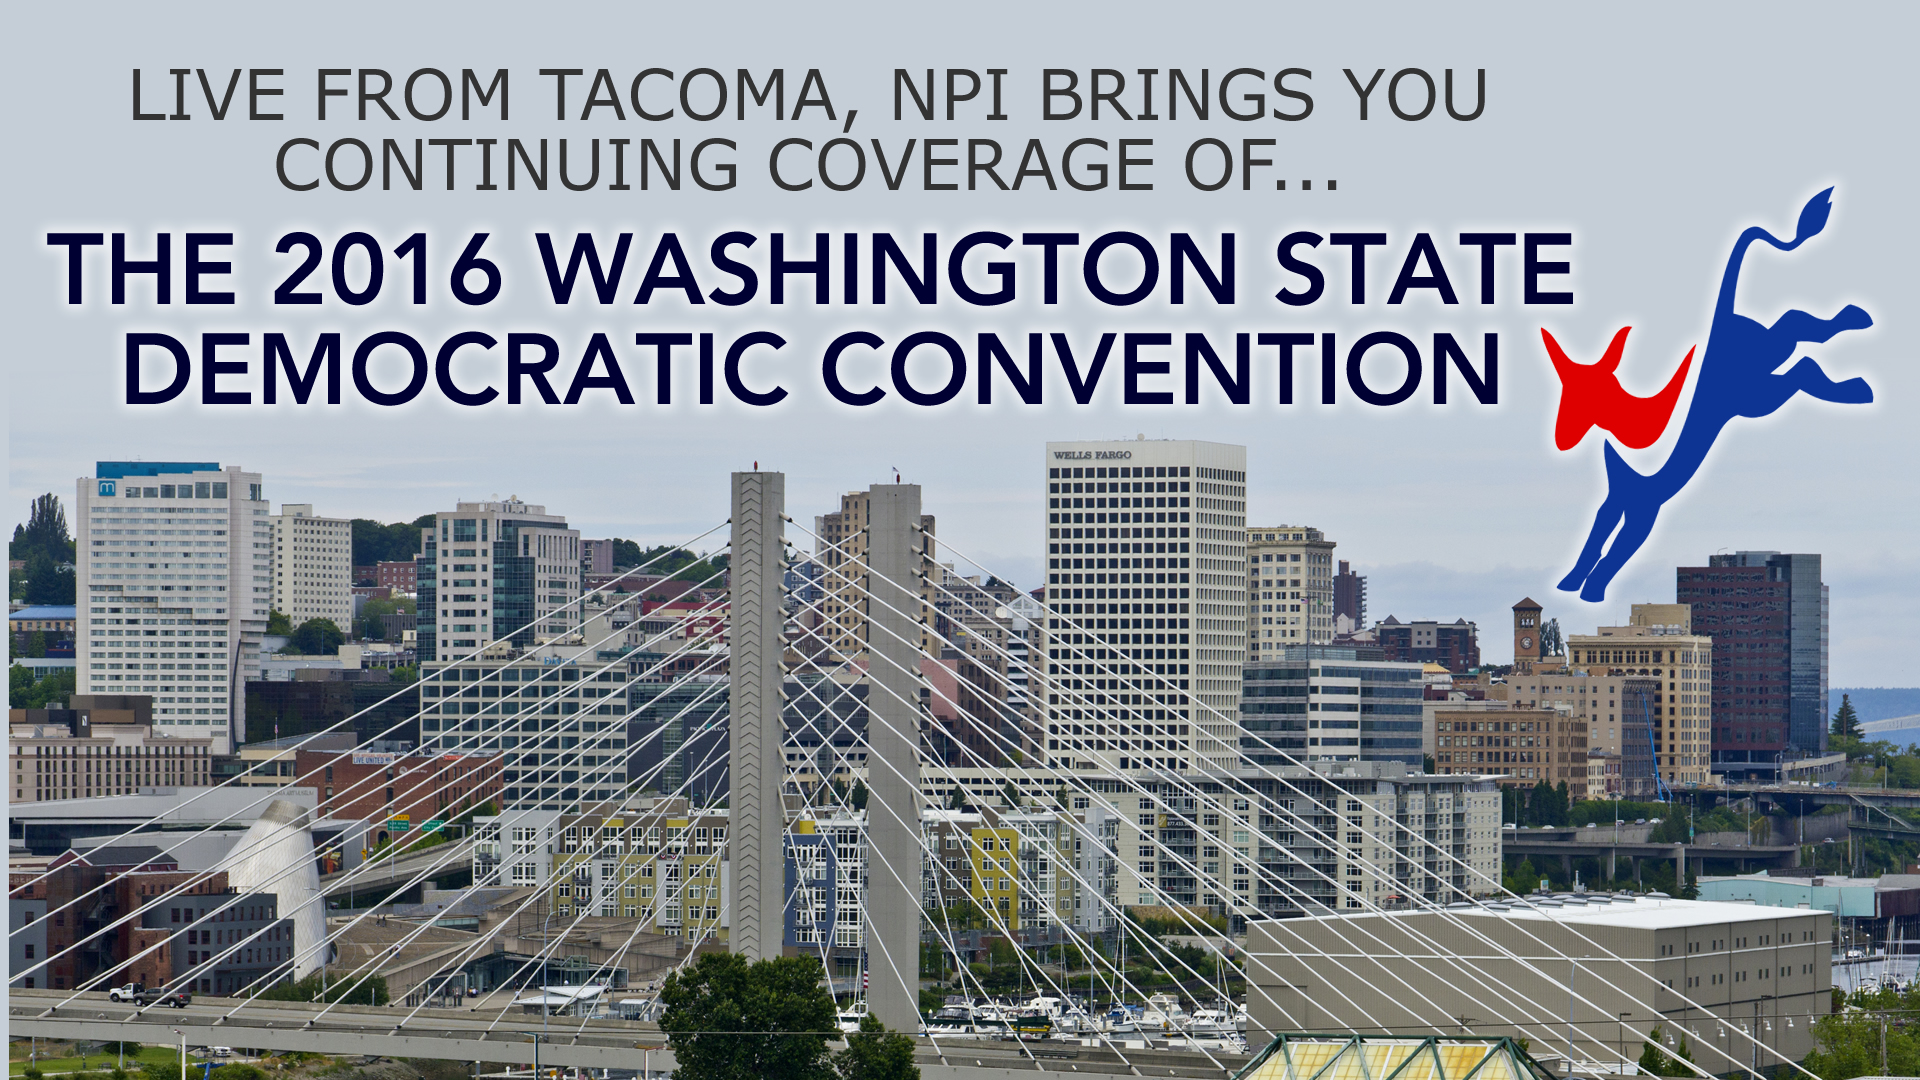 Live From Tacoma, NPI brings you coverage of the 2016 Washington State Democratic Convention